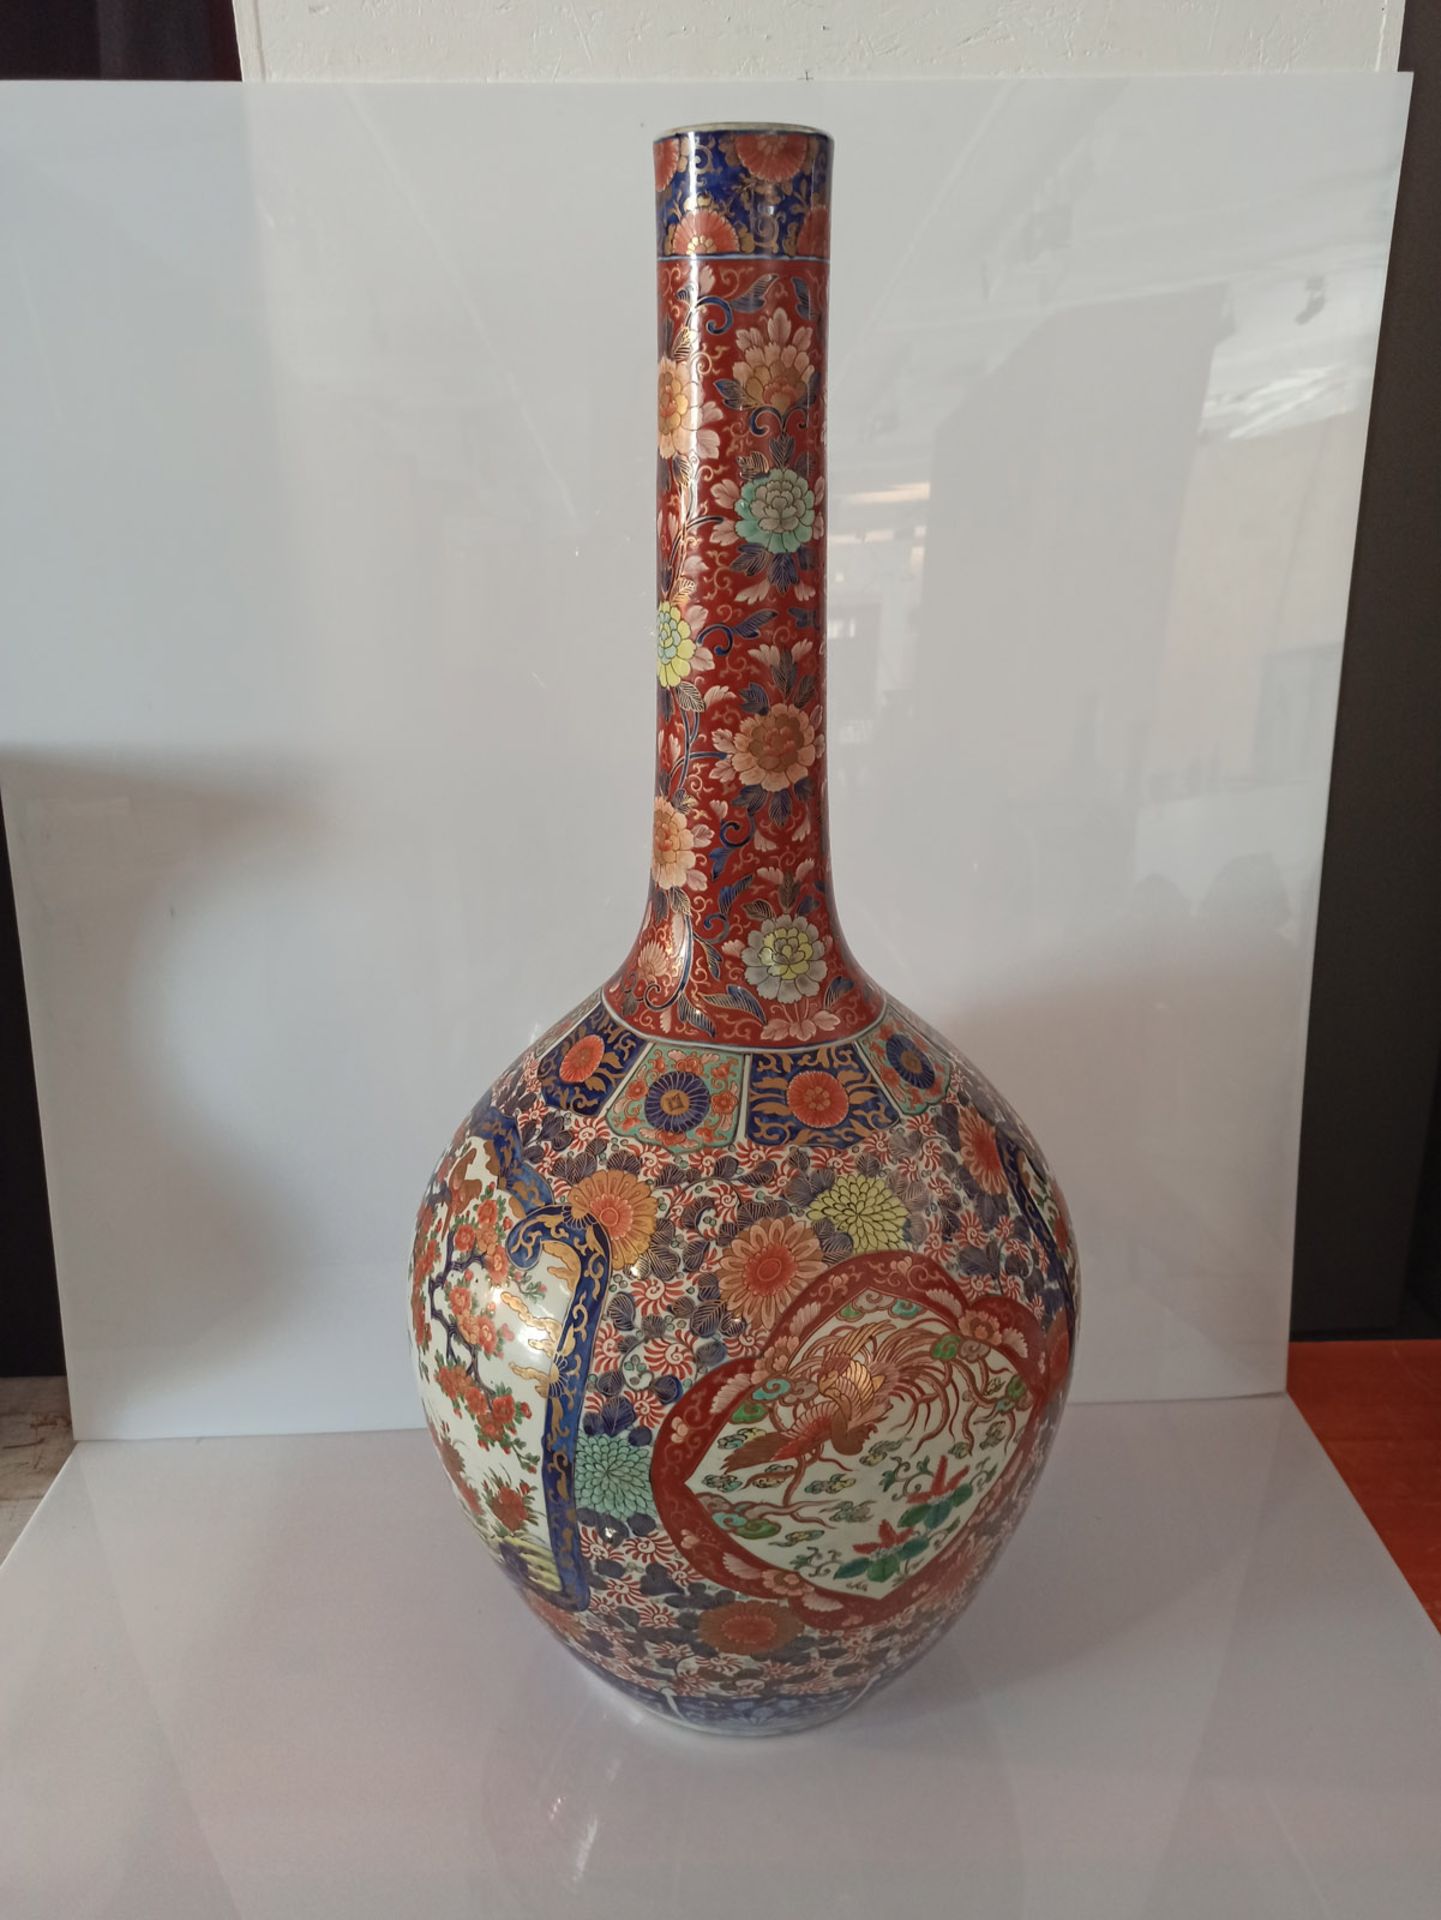 A LARGE NARROW-NECKED IMARI PORCELAIN VASE DECORATED WITH BIRDS AND FLOWERS - Image 4 of 9